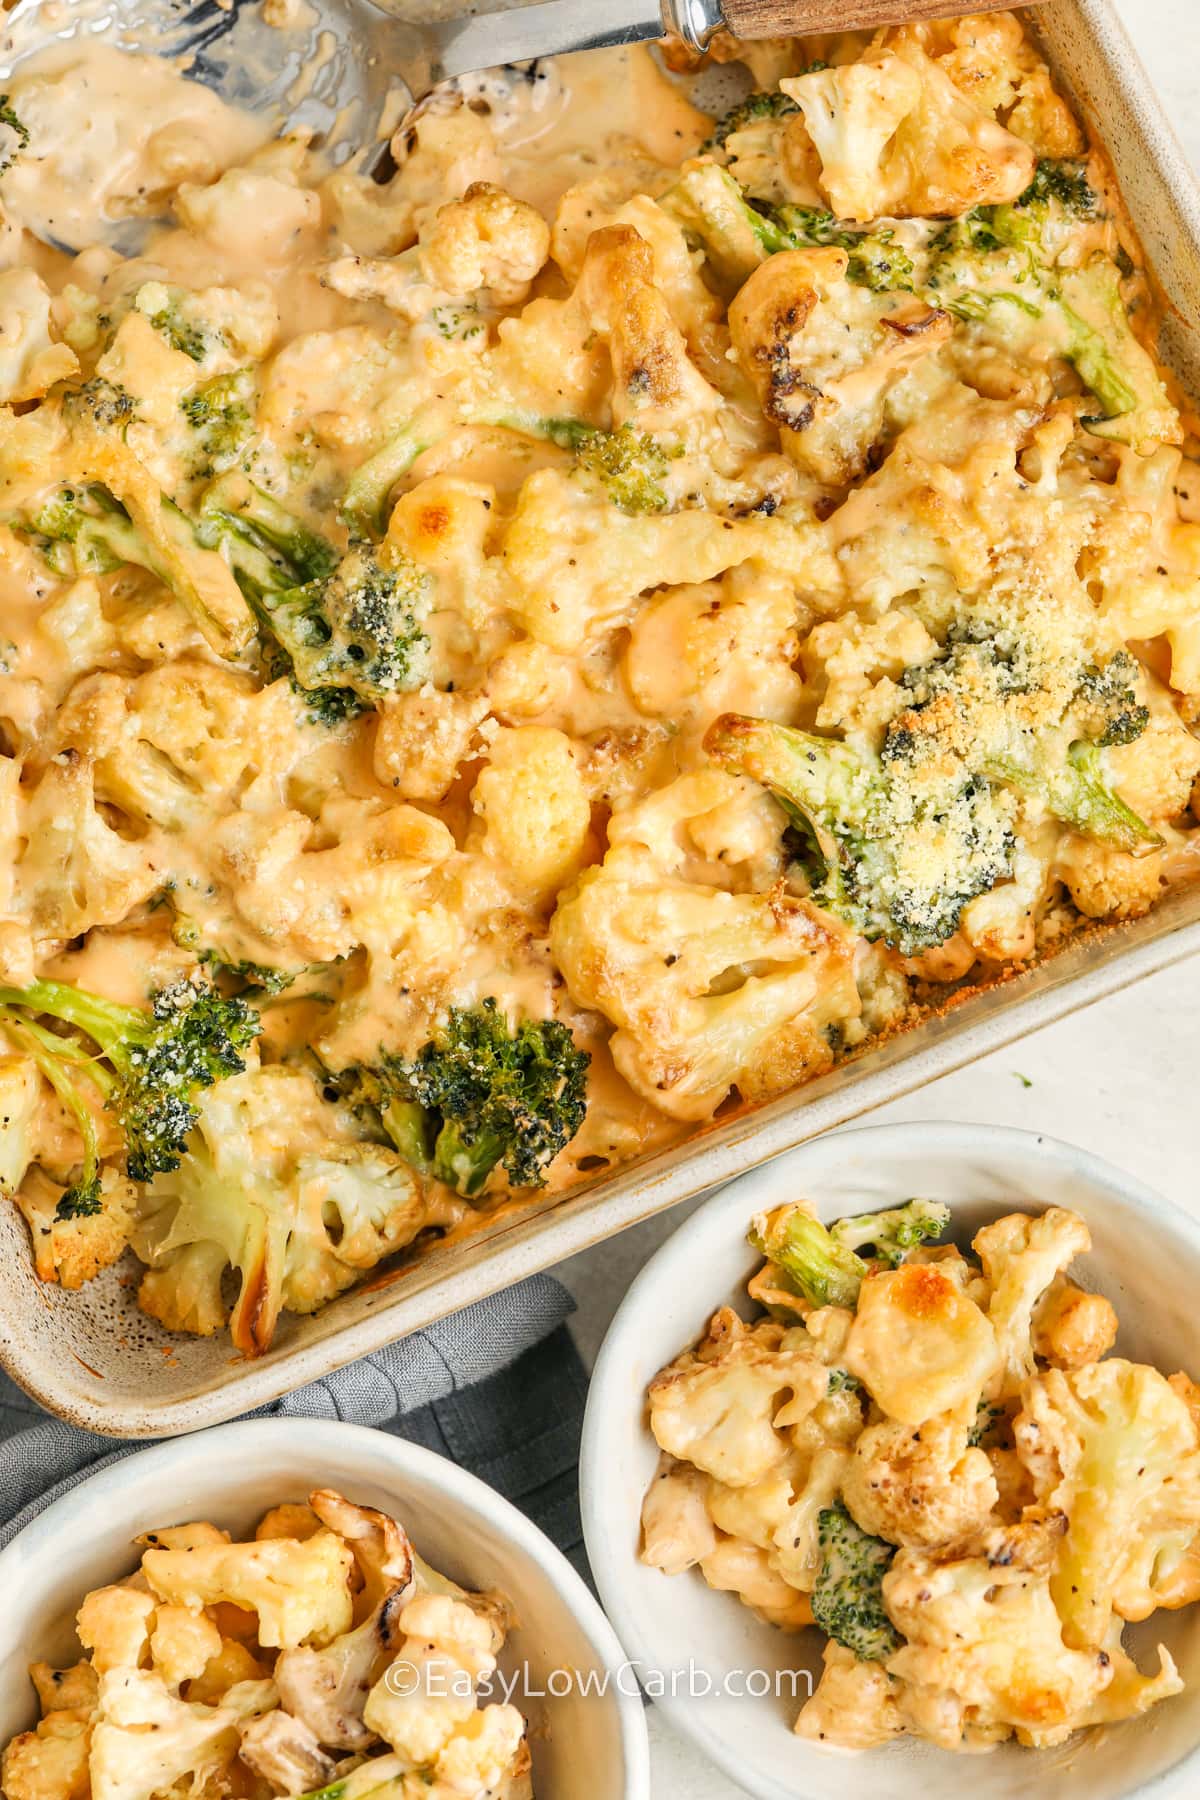 Broccoli cauliflower casserole with two servings in bowls next to it.